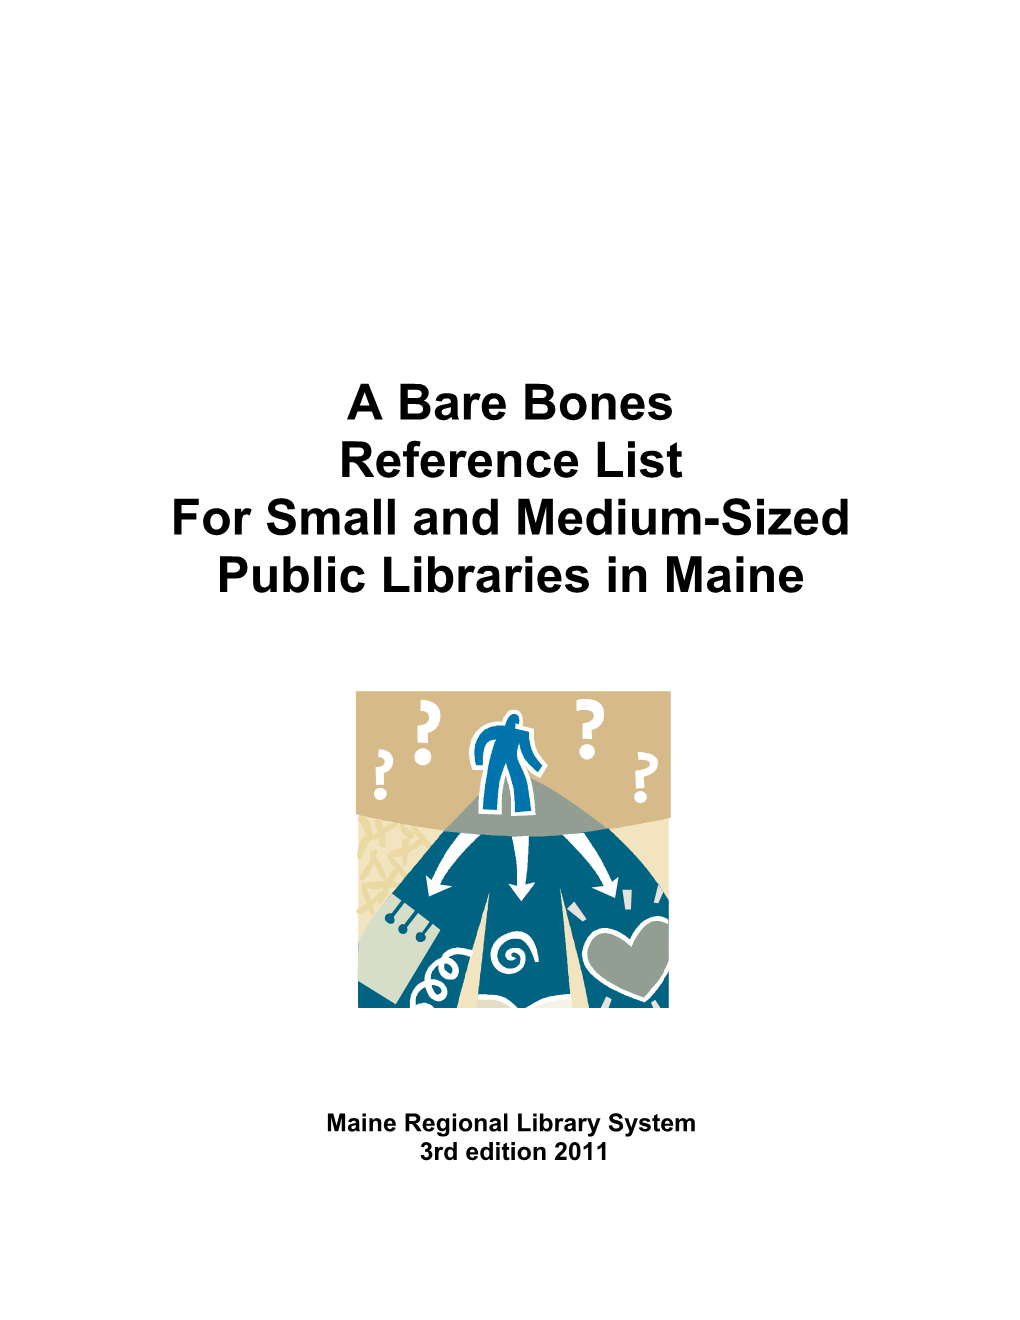 Maine Regional Library System